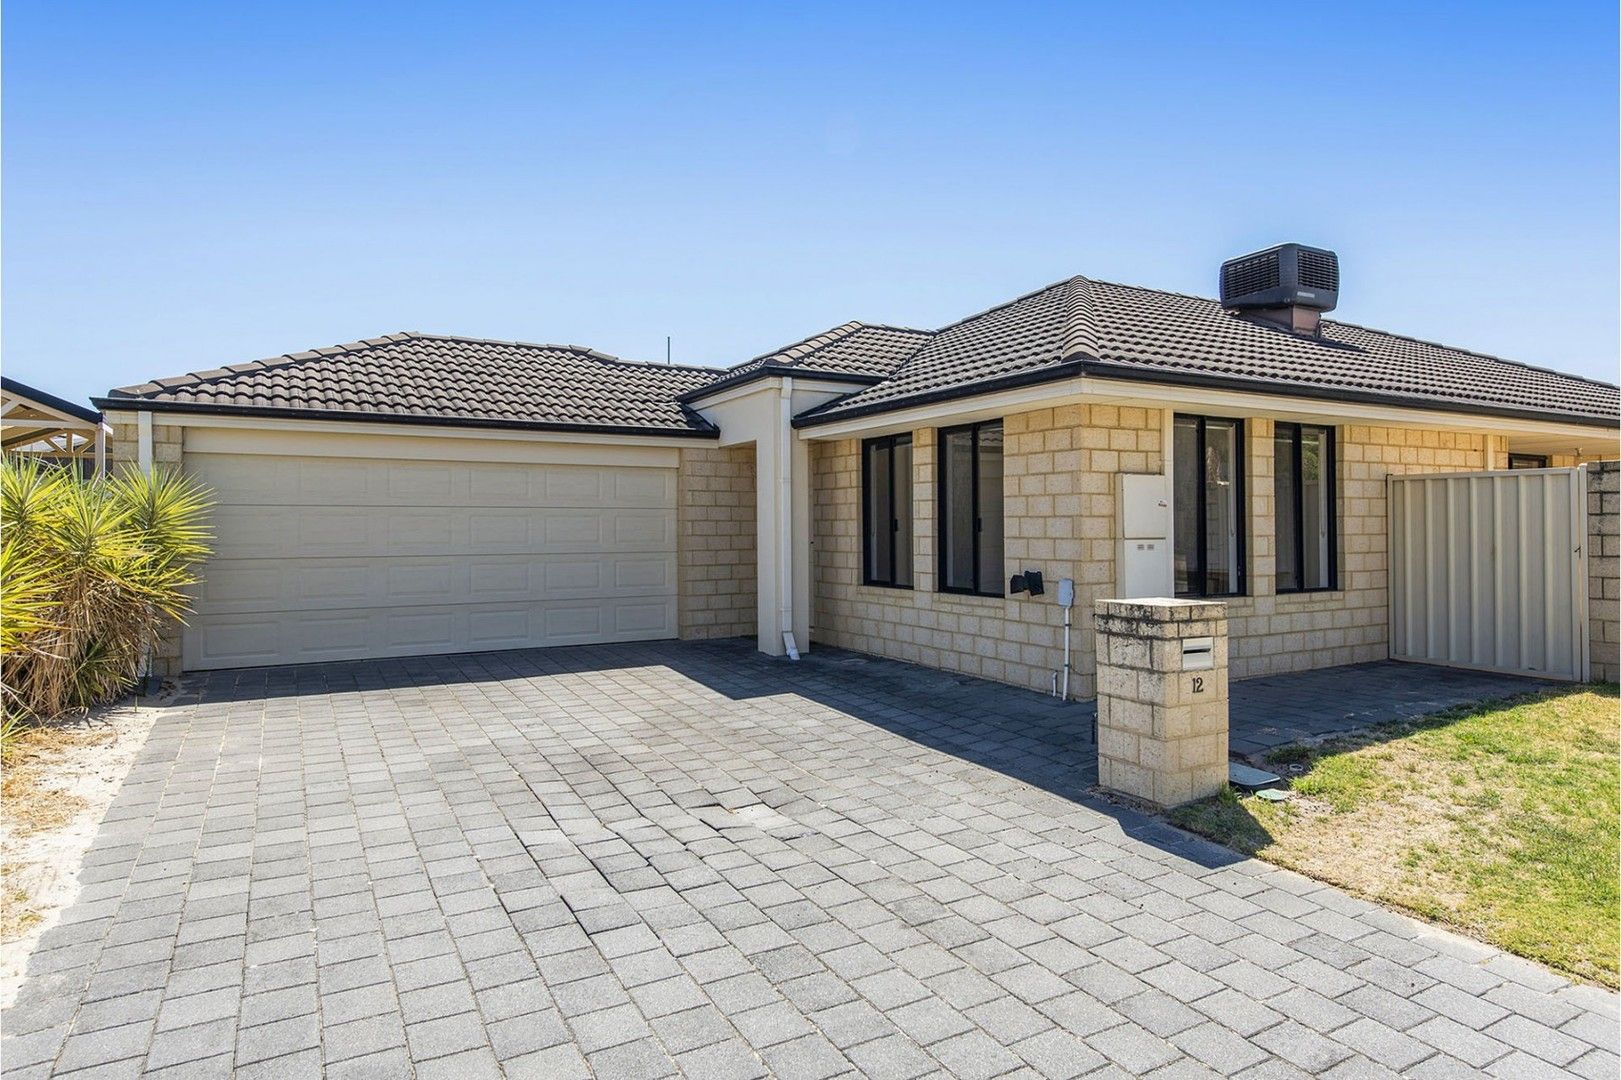 3 bedrooms House in 12 Leschenaultia Drive CANNING VALE WA, 6155